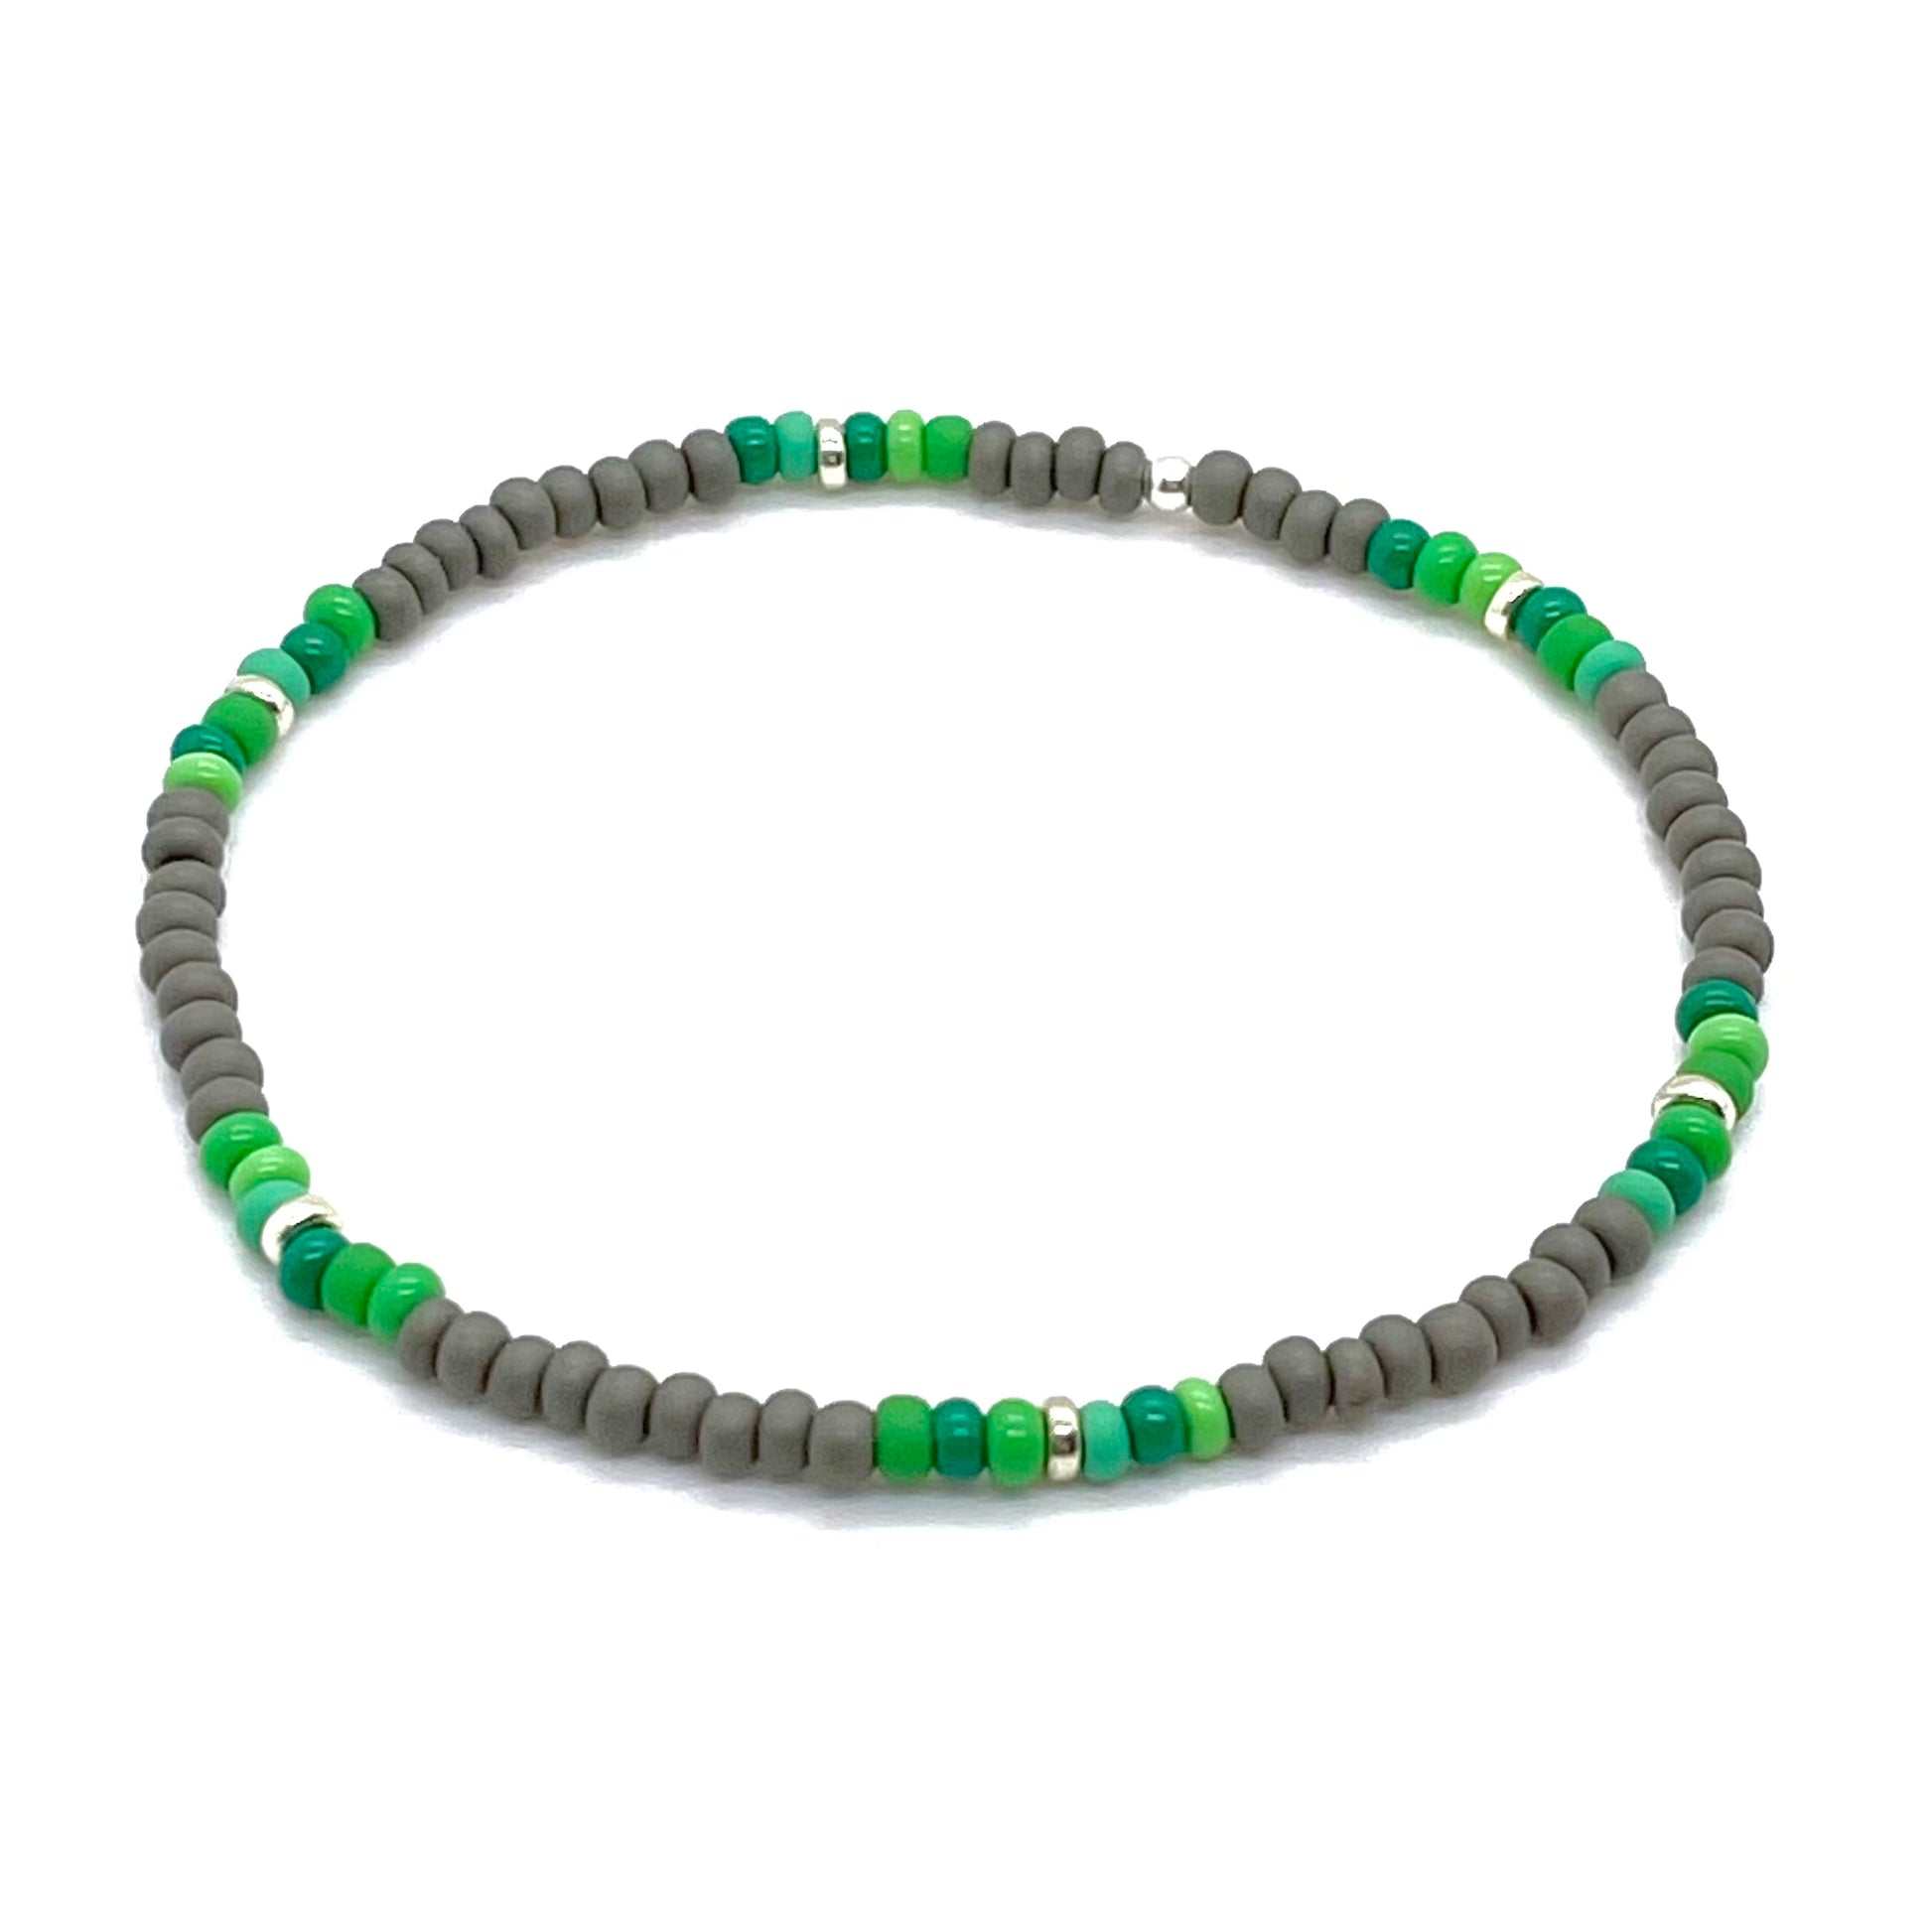 Green bracelet for men with gray taupe seed beads and silver-tone accent beads. Waterproof simple stretch bracelet.